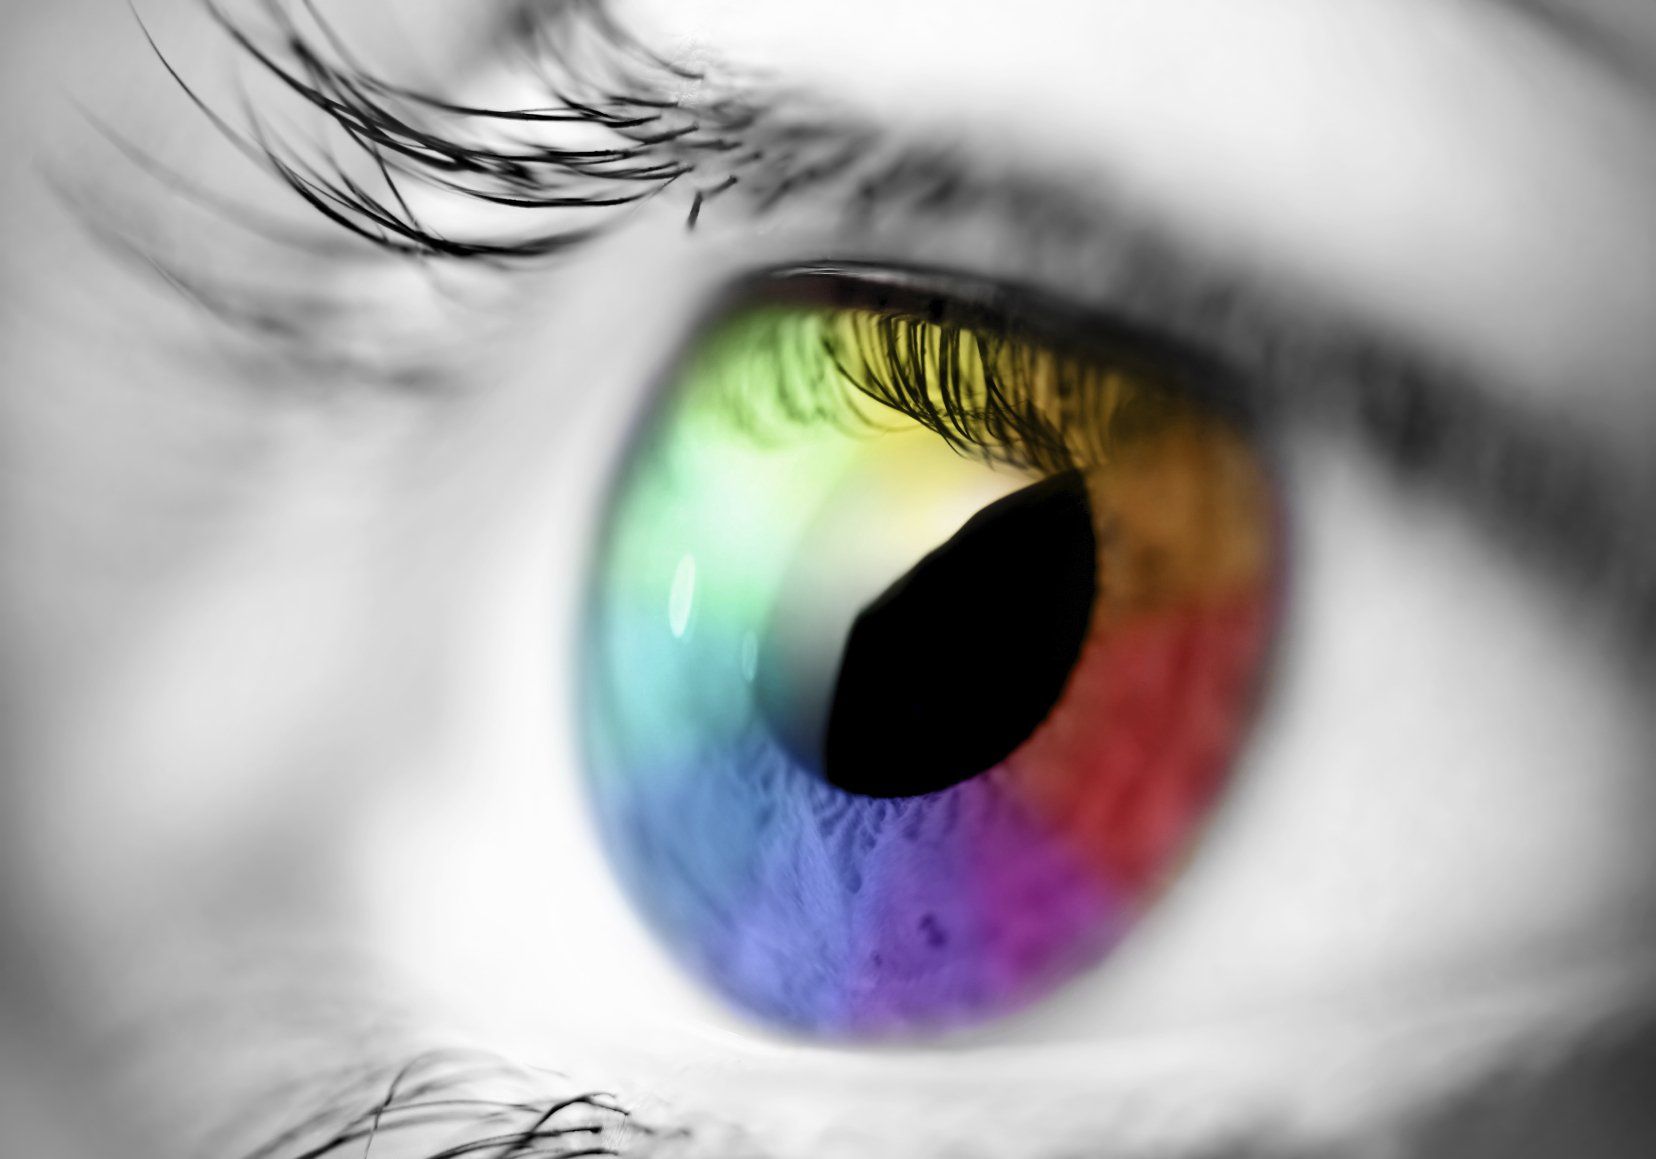 image of a black and white eye with a rainbow colored iris